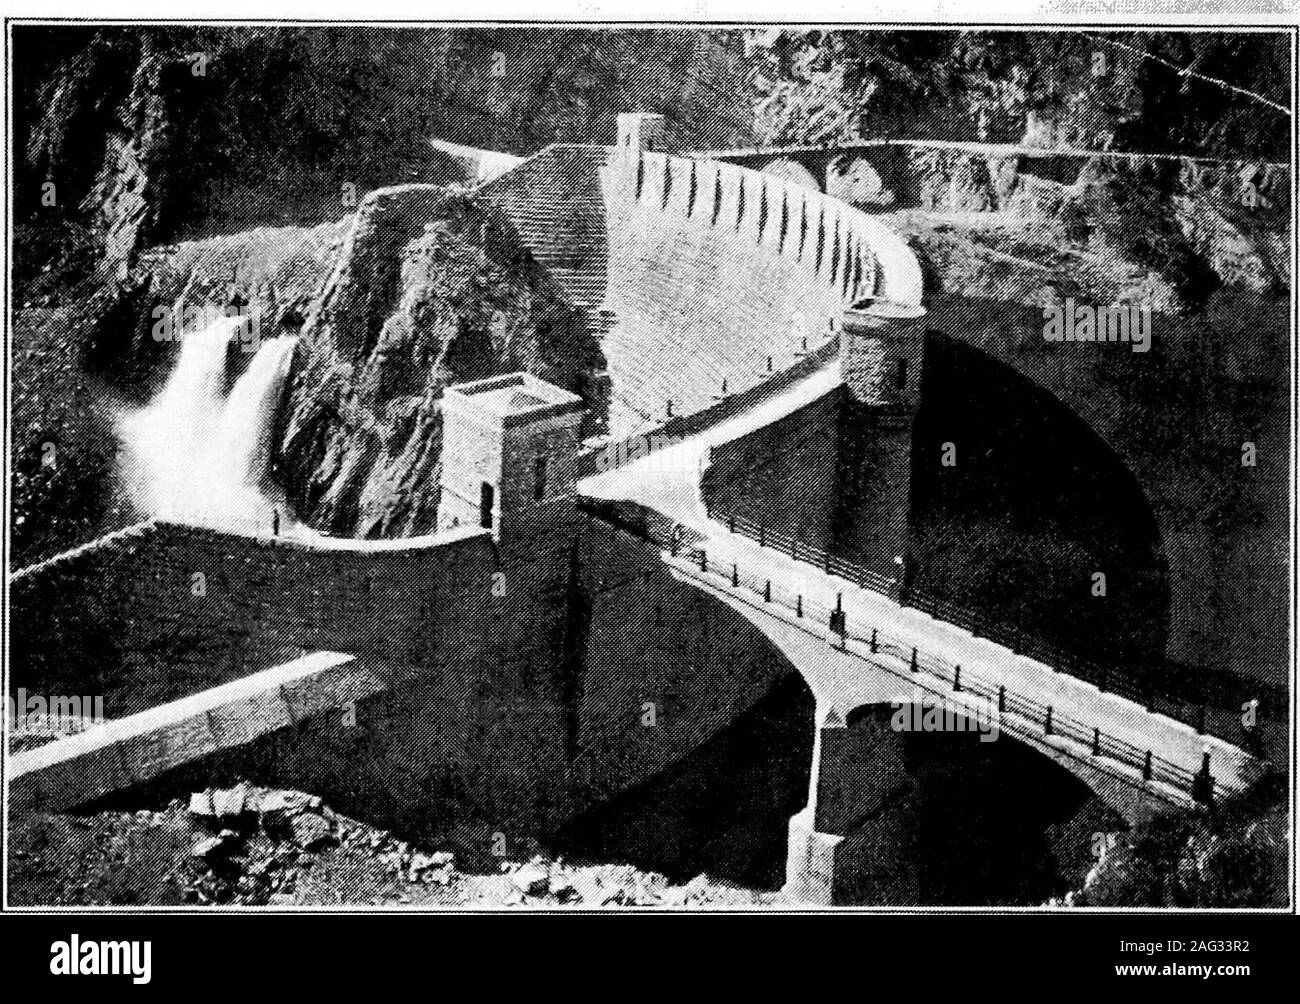 . Principles of irrigation engineering, arid lands, water supply, storage works, dams, canals, water rights and products. Fig. C.—Spillway of Bumping Lake dam. Yakima Project, Wash.. Fig. D.—Spillways of Roosevelt Dam. Salt River Project, Ariz. DAM SITES 193 necessary to procure some form of apparatus for more systematicwork. Recourse is usually made to the ordinary well diiller who, withsuitable rig or outfit is accustomed to drilling wells through sand,gravel, boulders, and solid rock. He can usually determine withreasonable degree of accuracy the character and thickness of the dif-ferent la Stock Photo